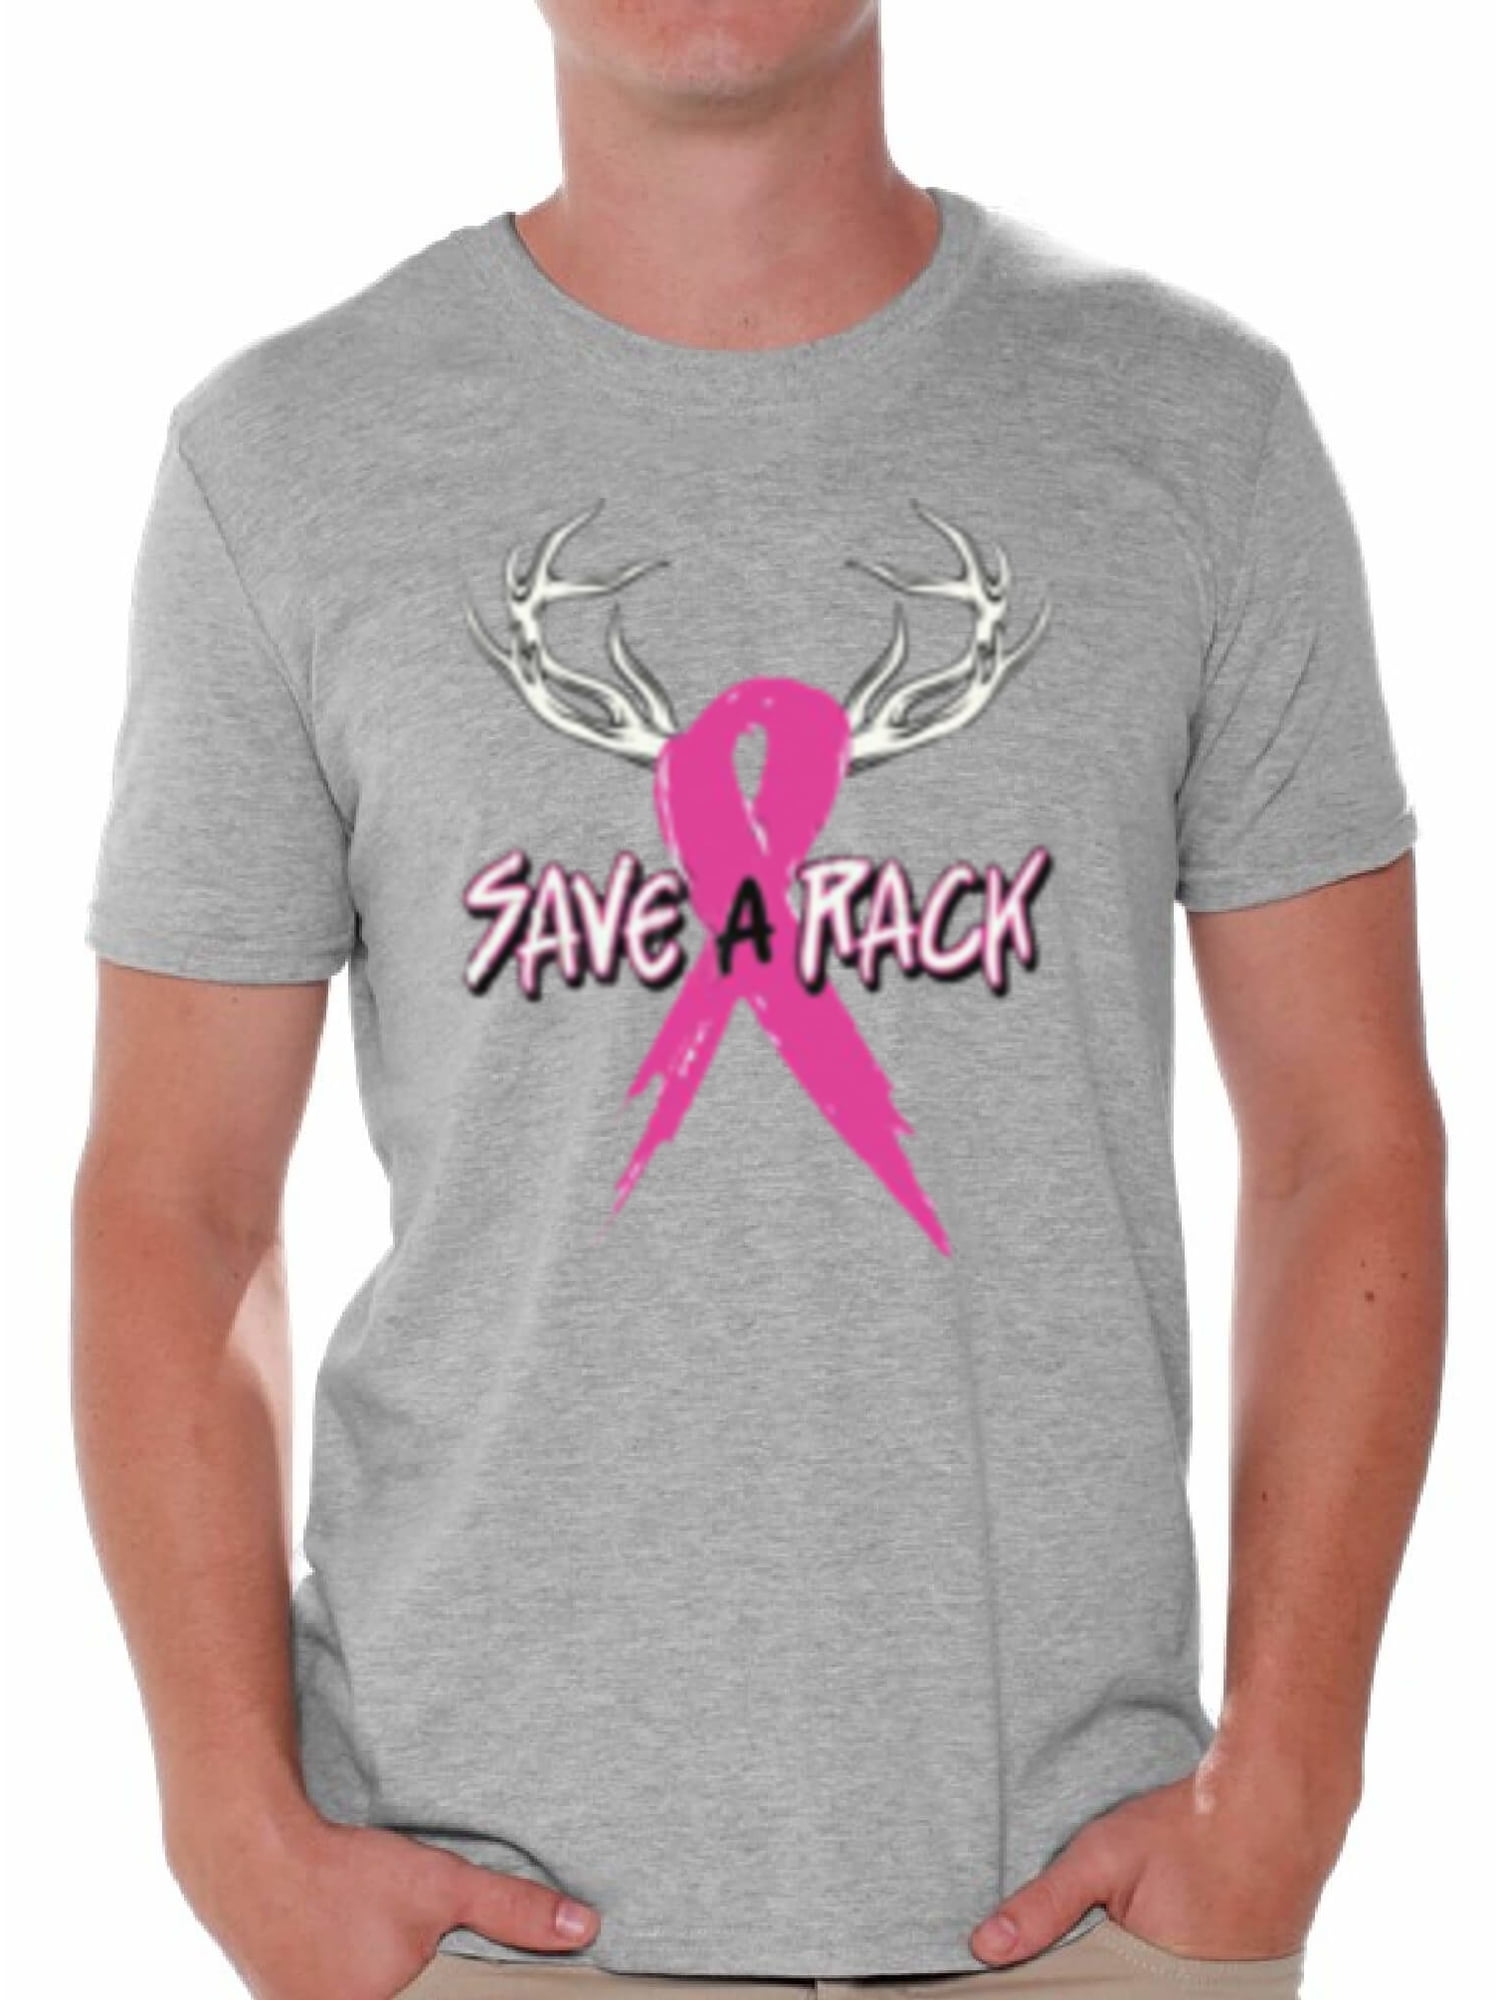 Save A Rack Youth T-Shirt Breast Cancer Awareness Pink Ribbon Support Antlers 